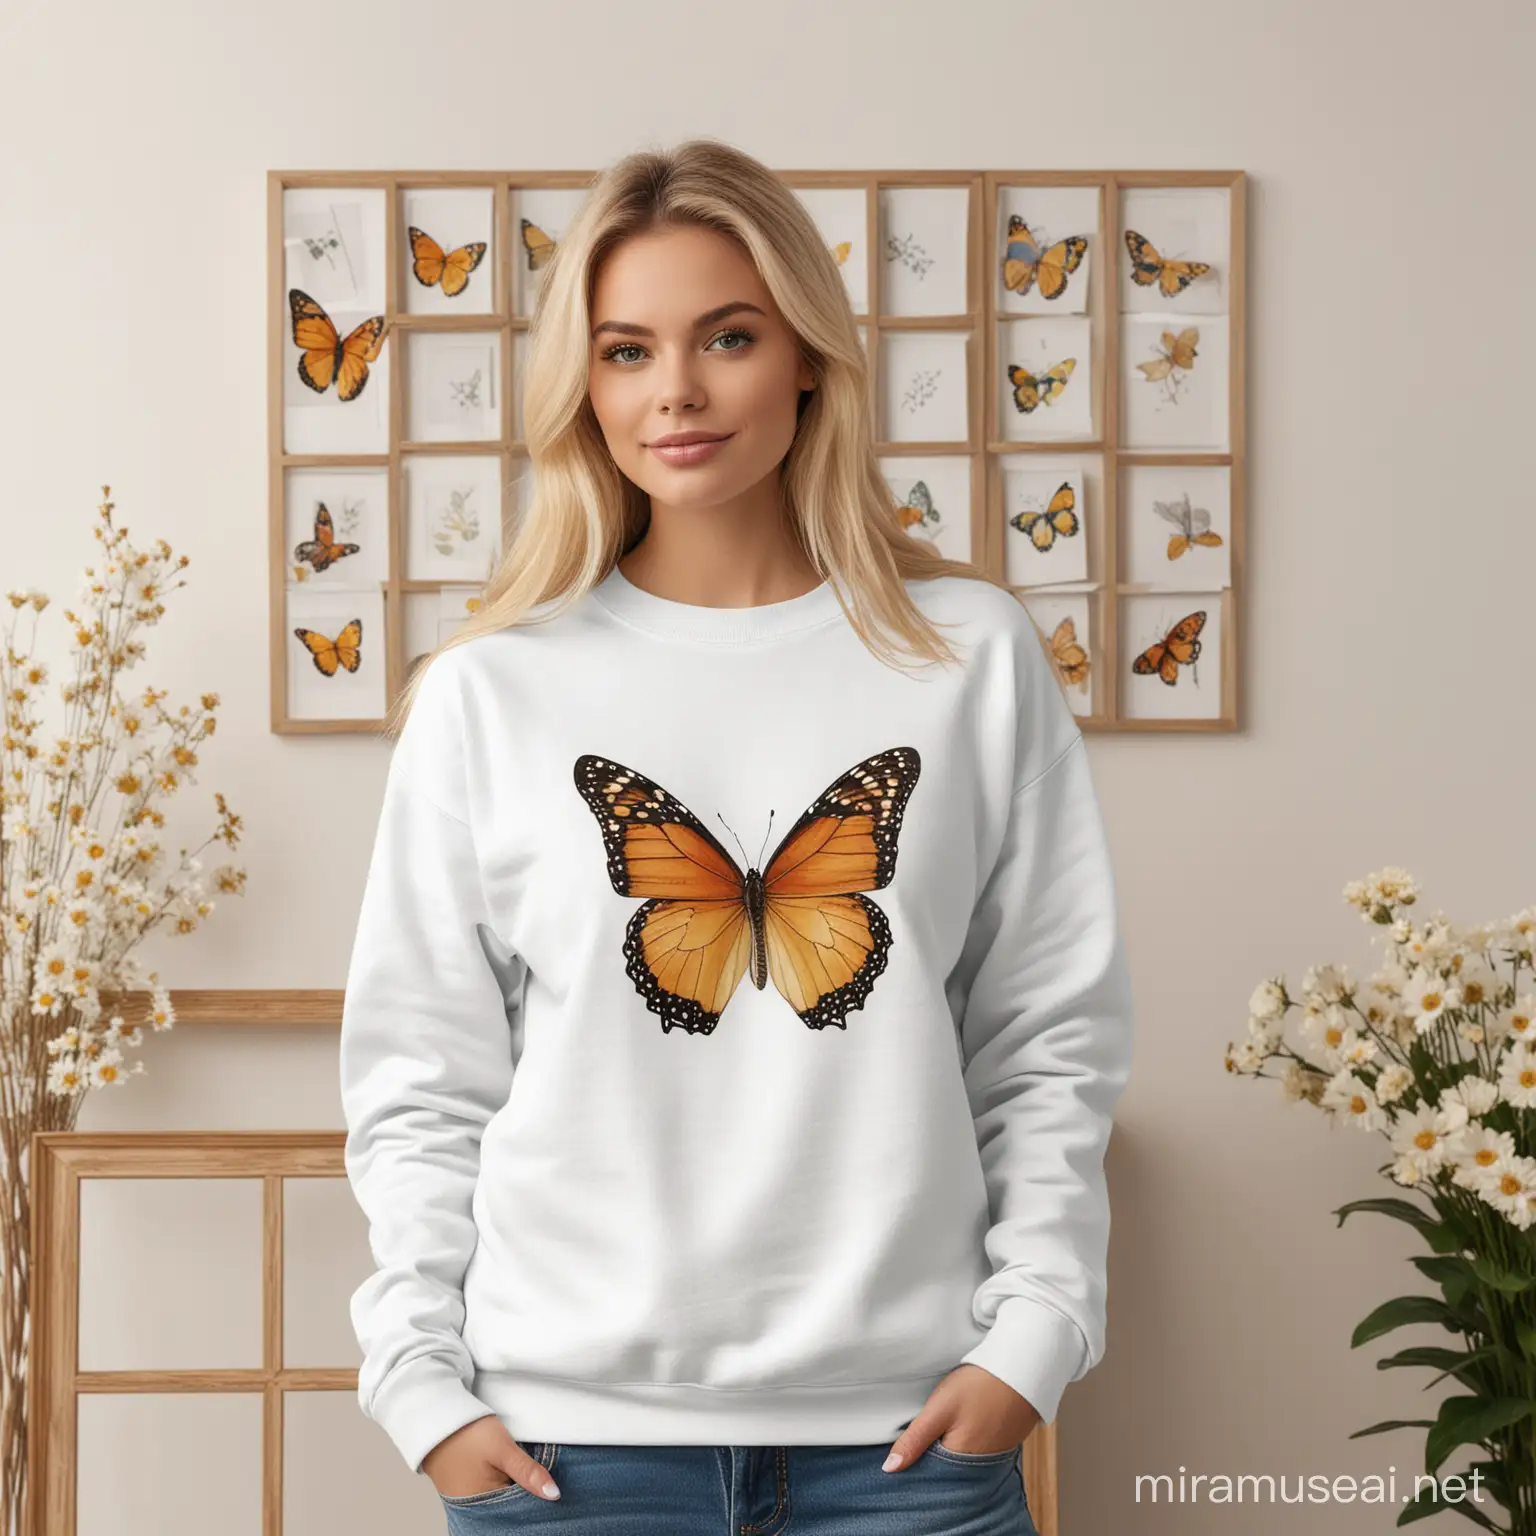 White Sweatshirt mockup, Blonde lady wearing blank Gildan 18000 sweatshirt, standing front on to camera, picture frames of butterflies and flowers on the wall in the background 